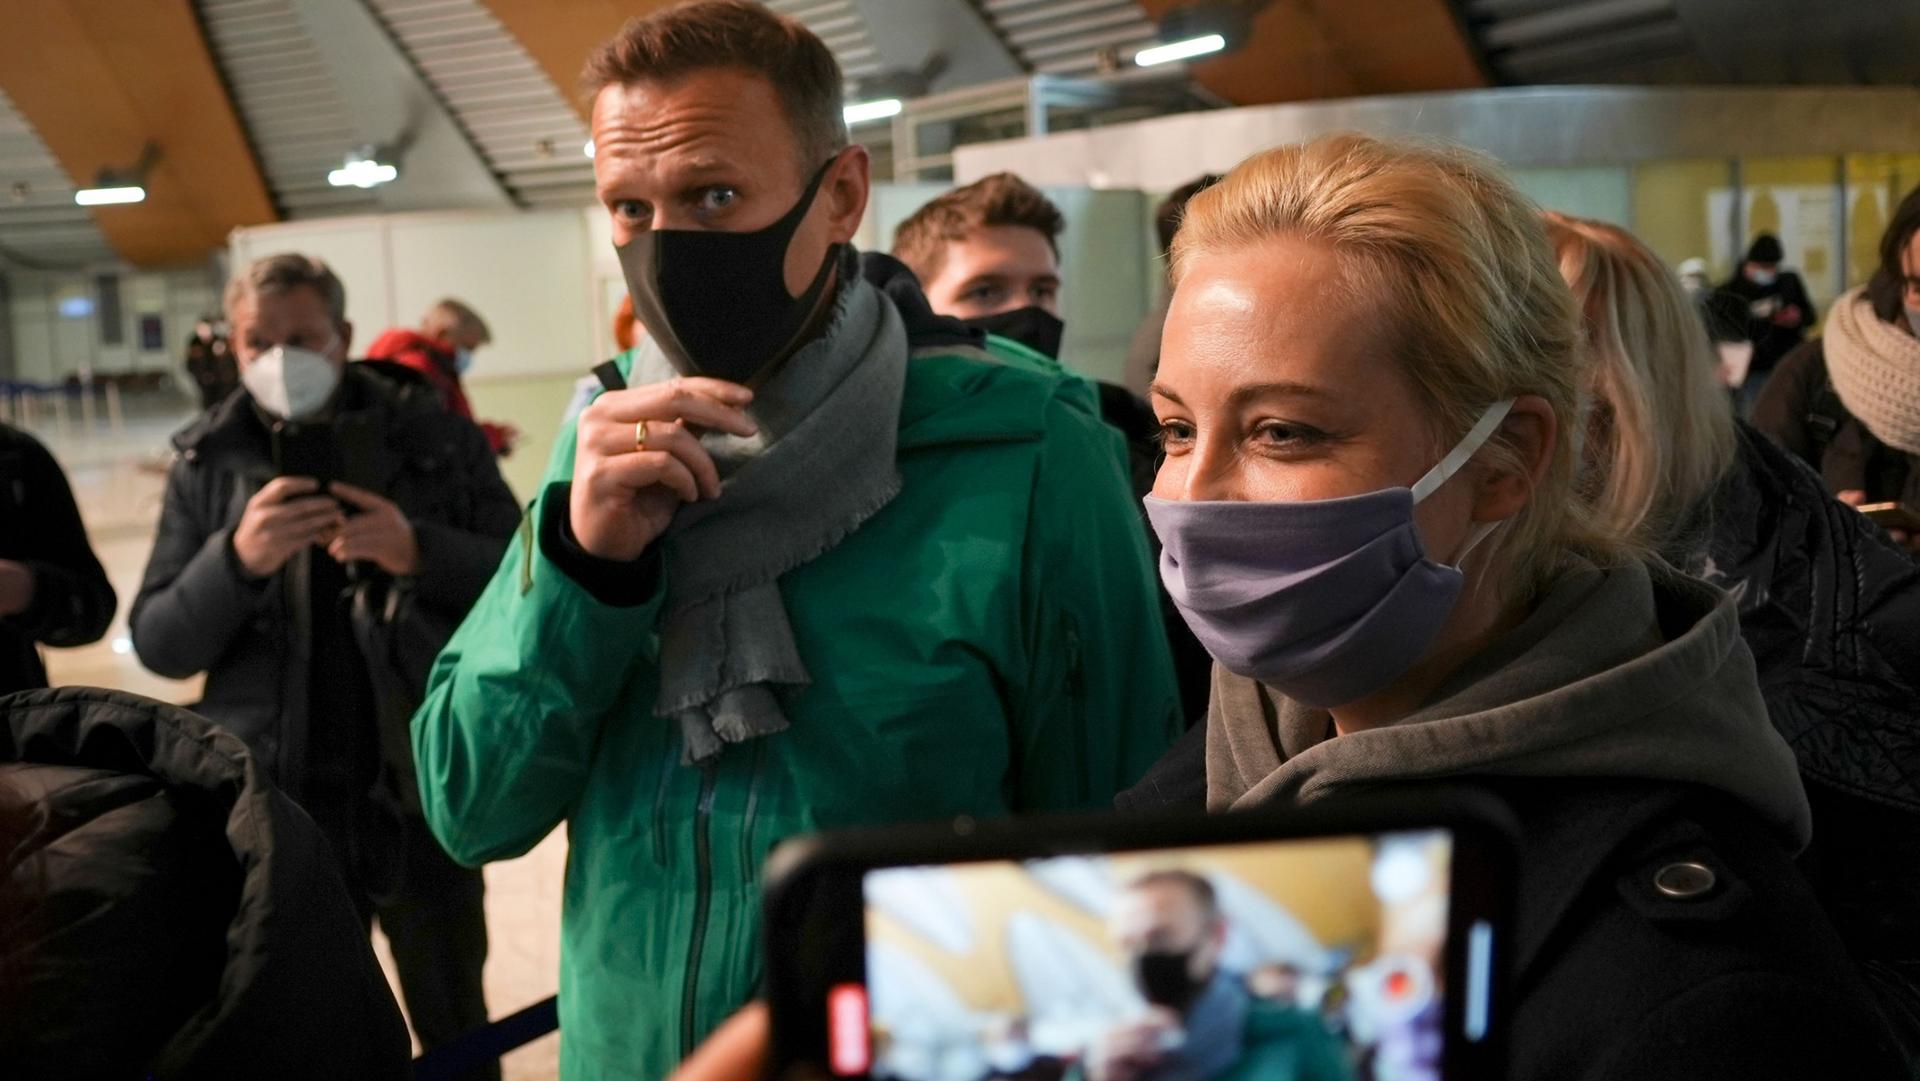 Alexei Navalny and his wife Yuliastand are shown wearing face masks and standing next to each other with a mobile phone also showing them in the near ground.